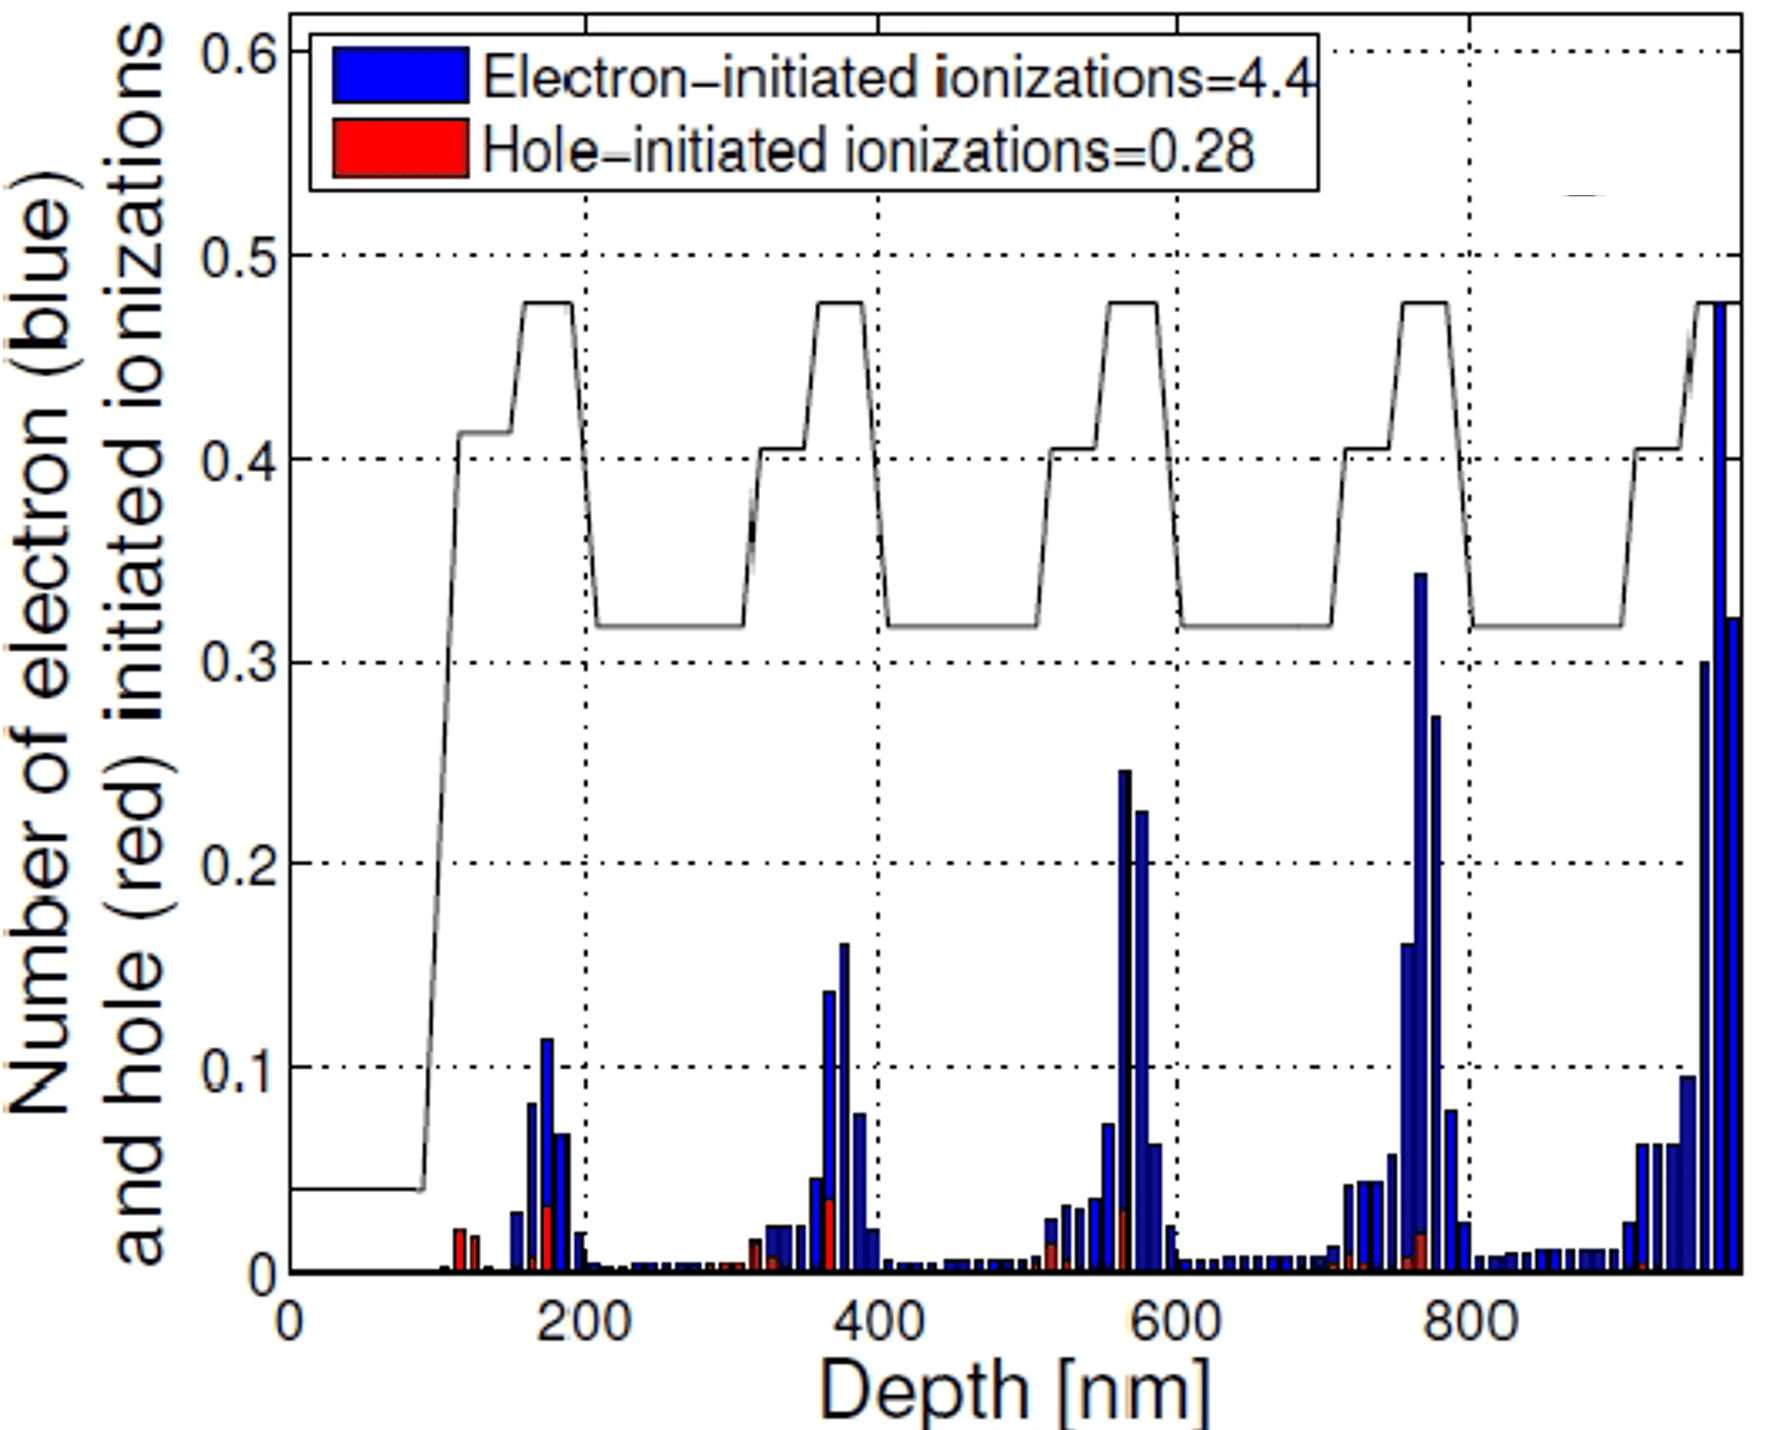 Figure 3: Spatial distribution of the impact ionization initiated by electrons (blue) and holes (red)